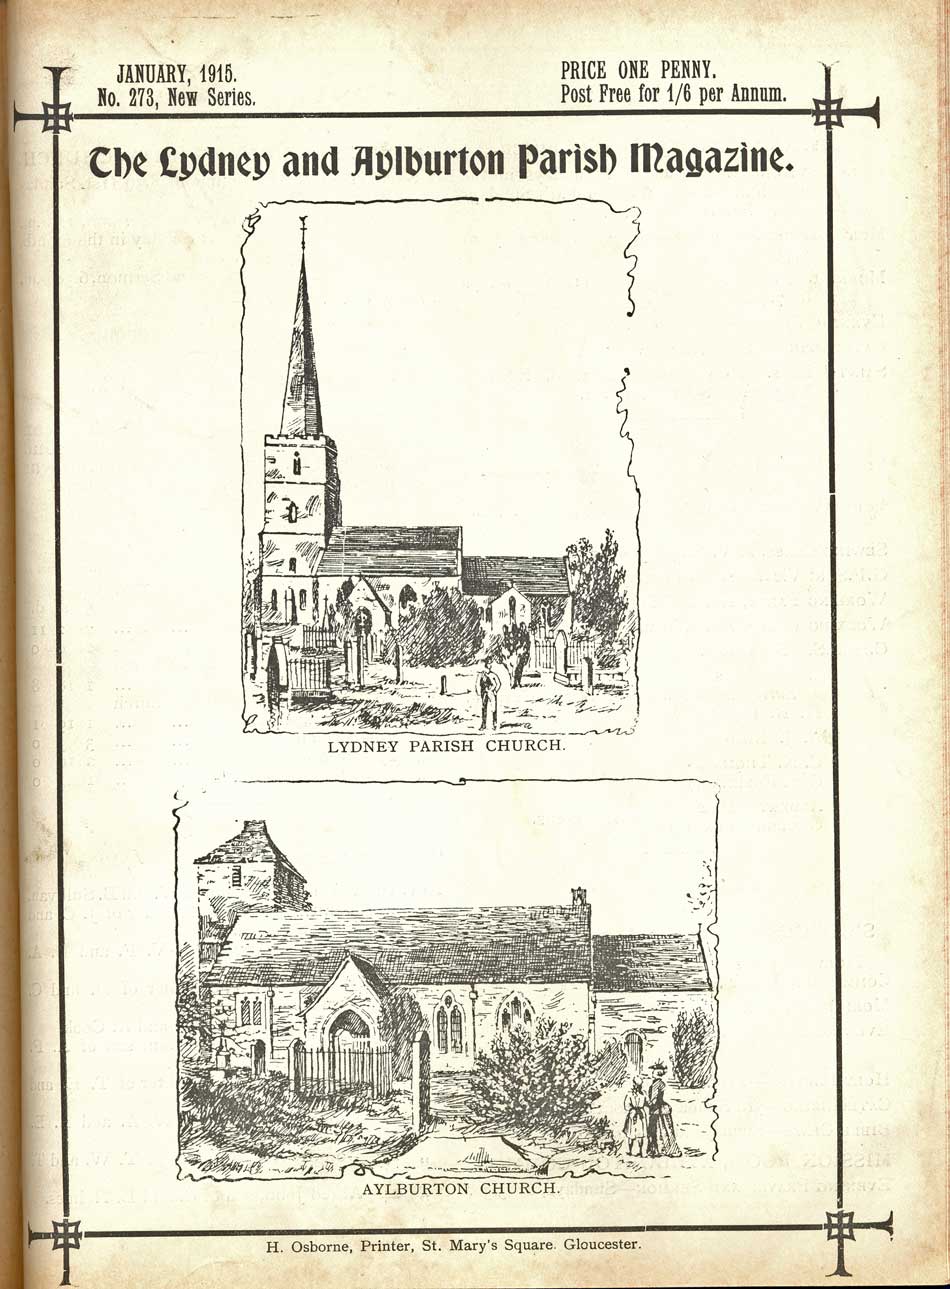 Lydney St Mary's Parich Magazine - Cover